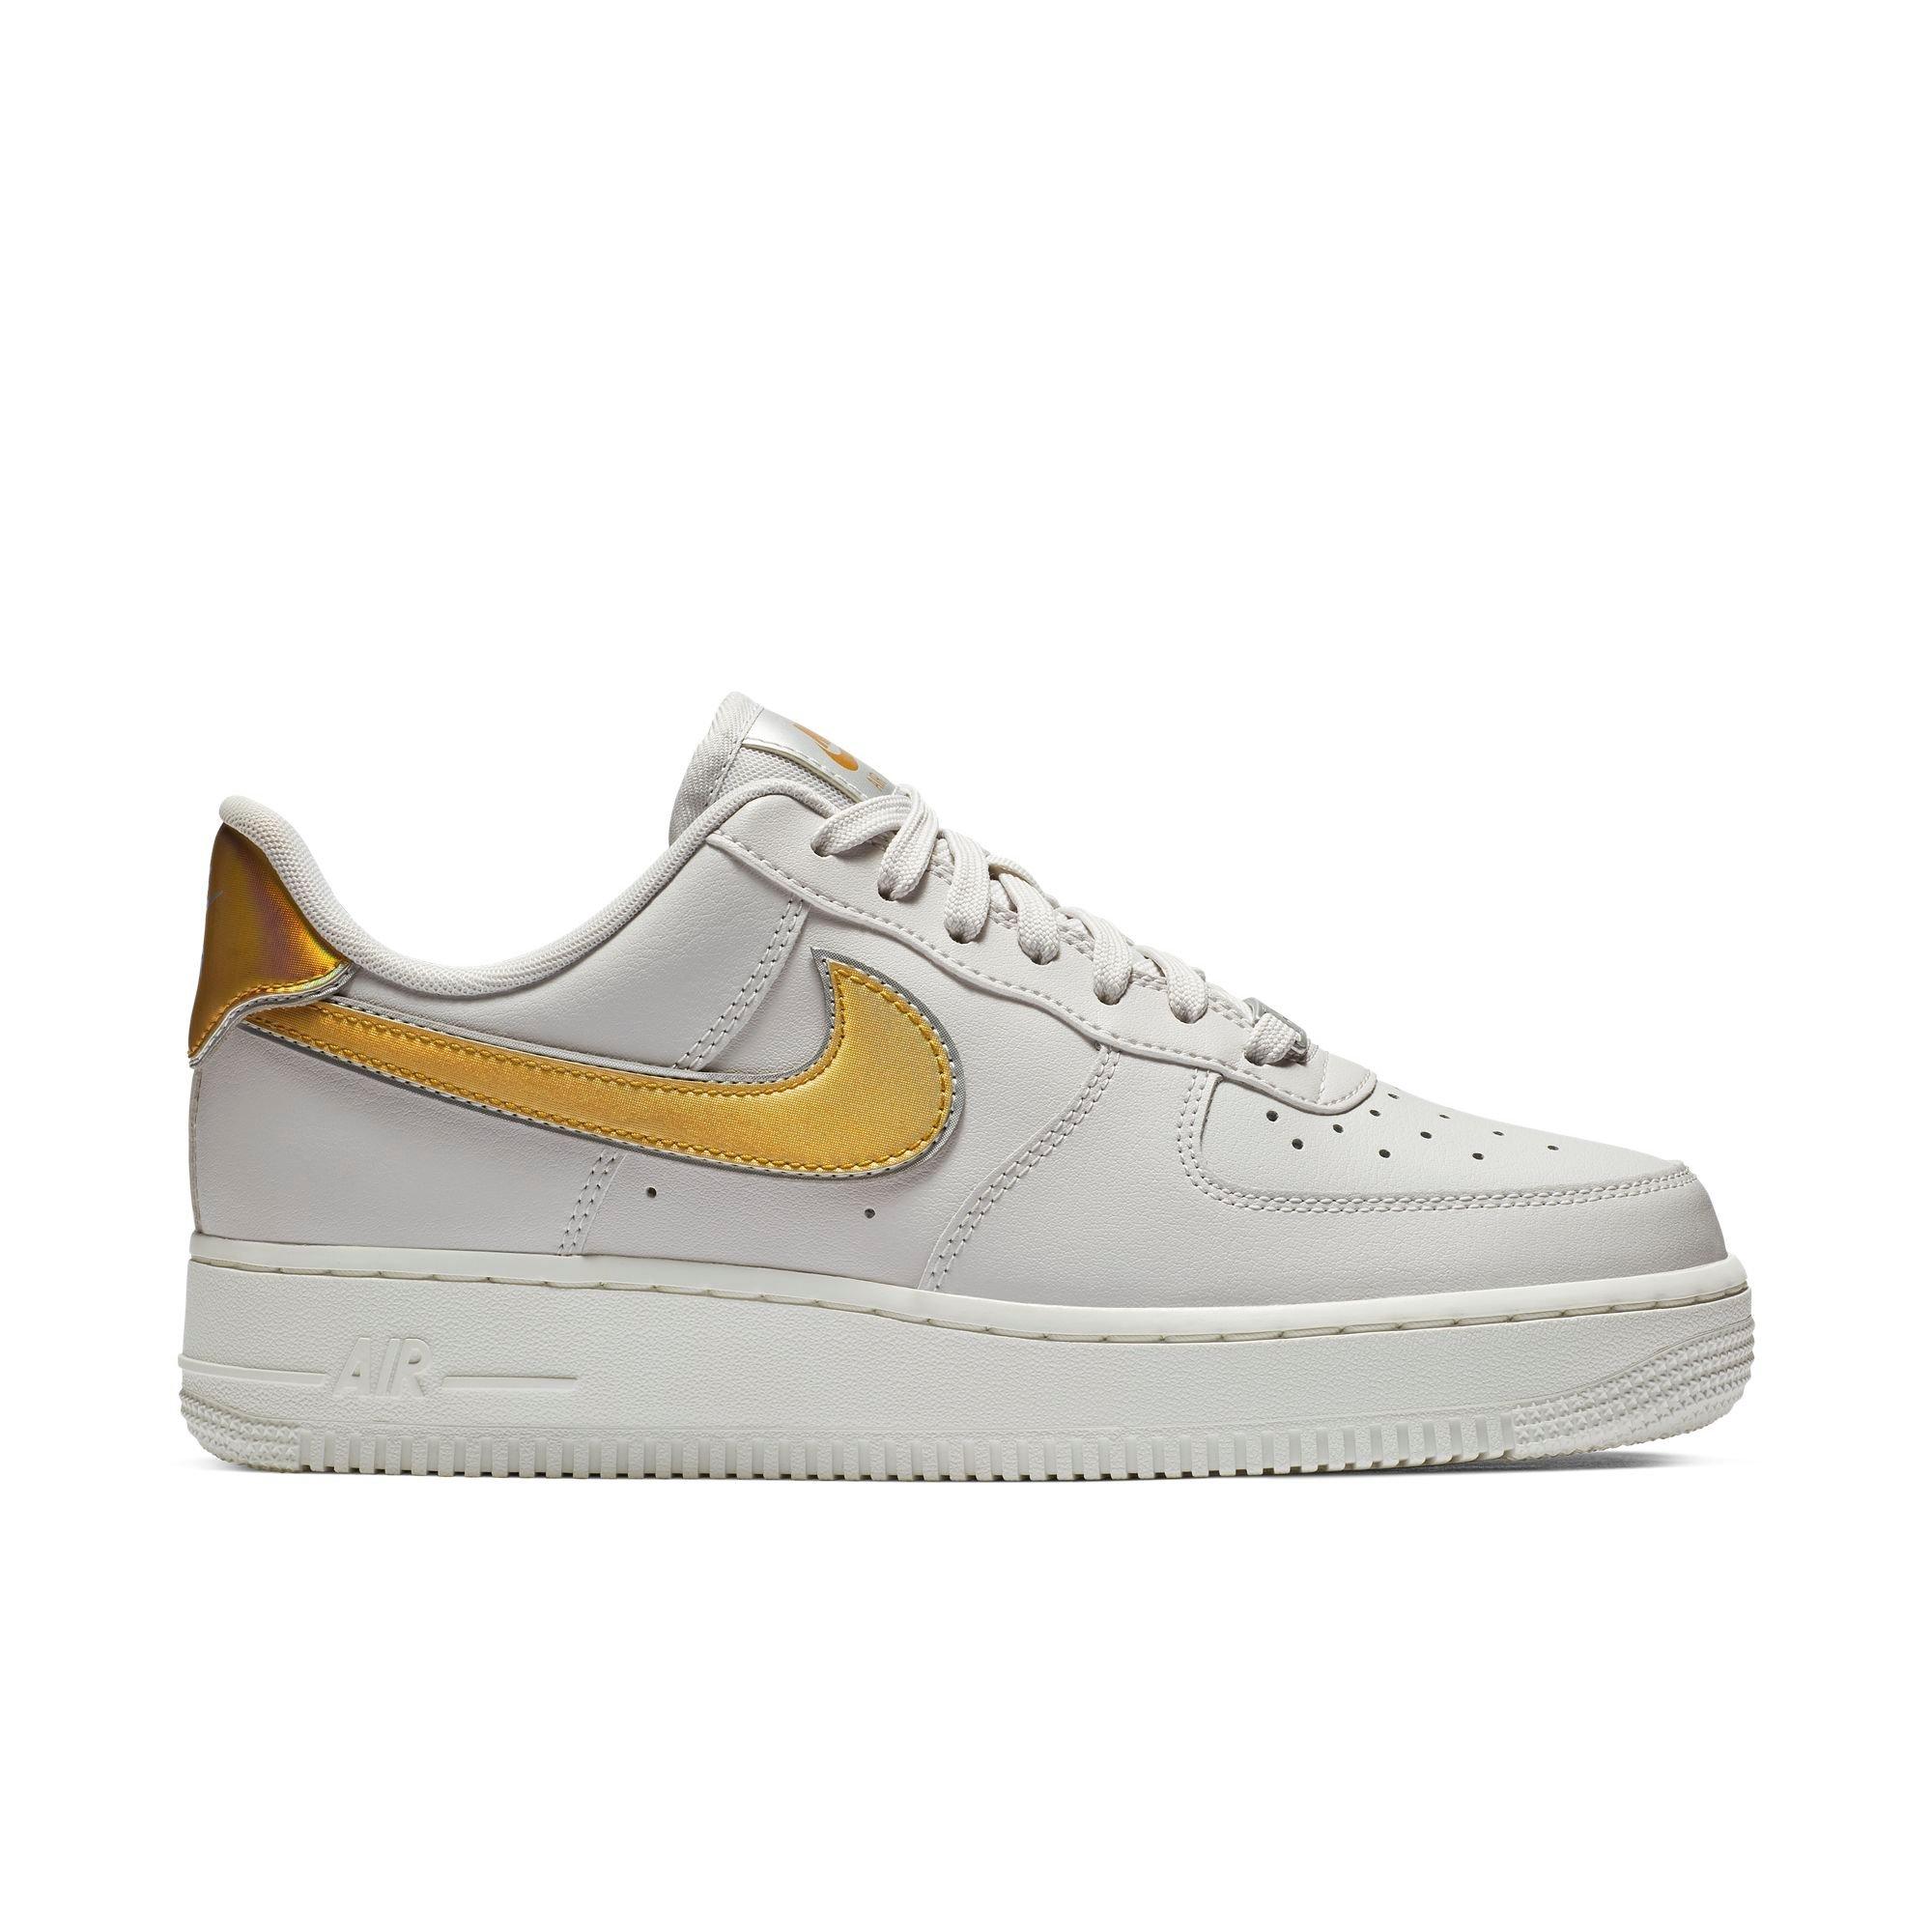 nike air force 1 womens white and gold